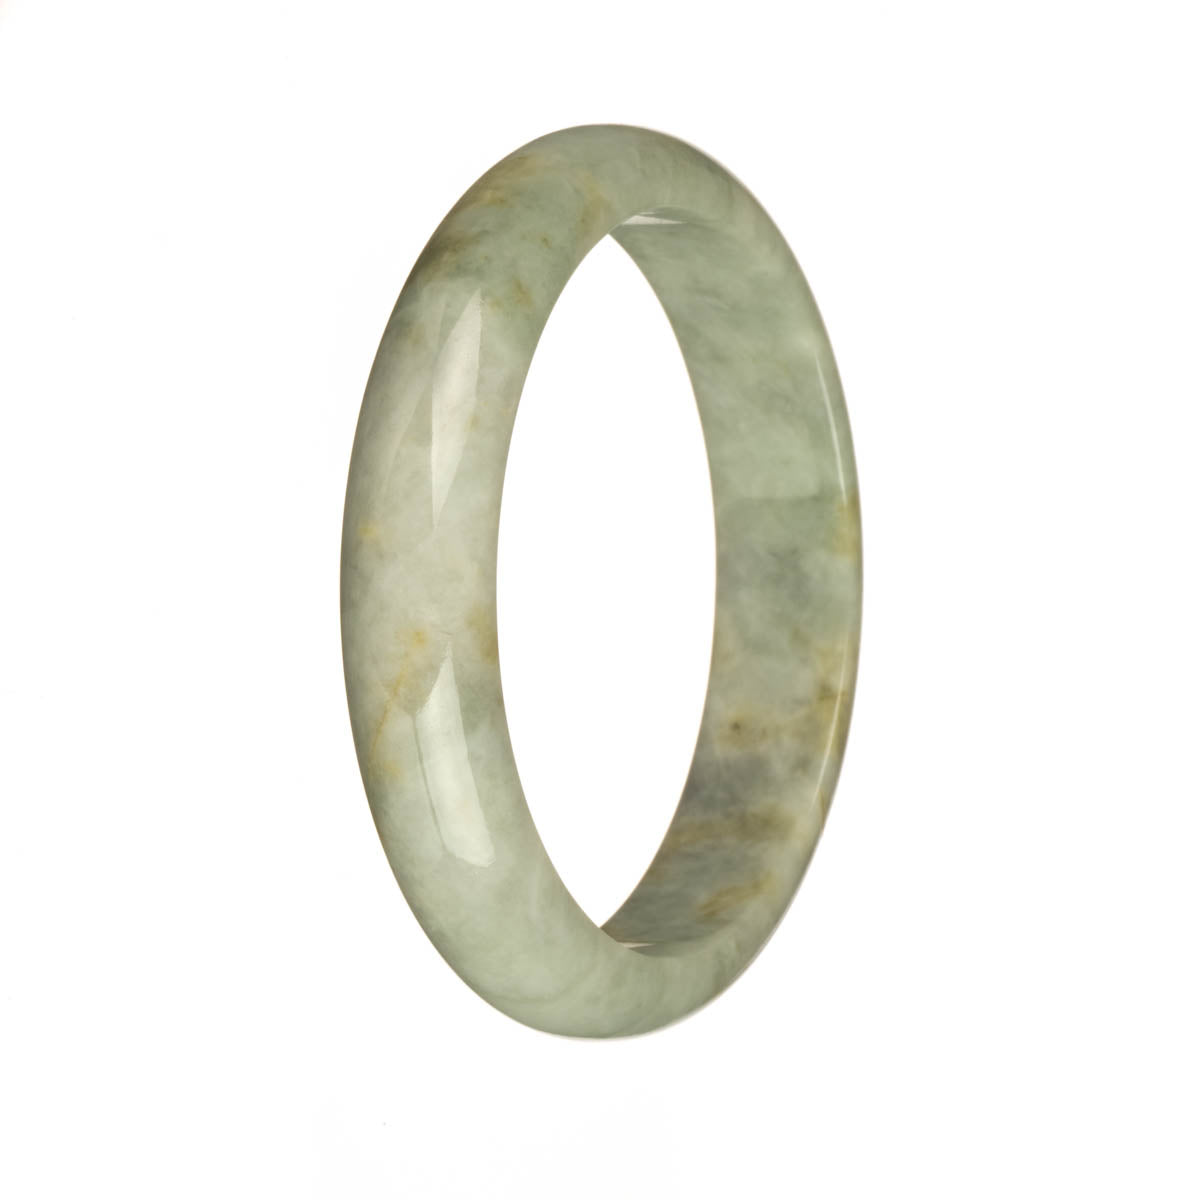 A half moon shaped jade bracelet with a genuine natural pale grey color, adorned with delicate pale green and brown patterns. Perfect for adding a touch of elegance and earthy beauty to any outfit.